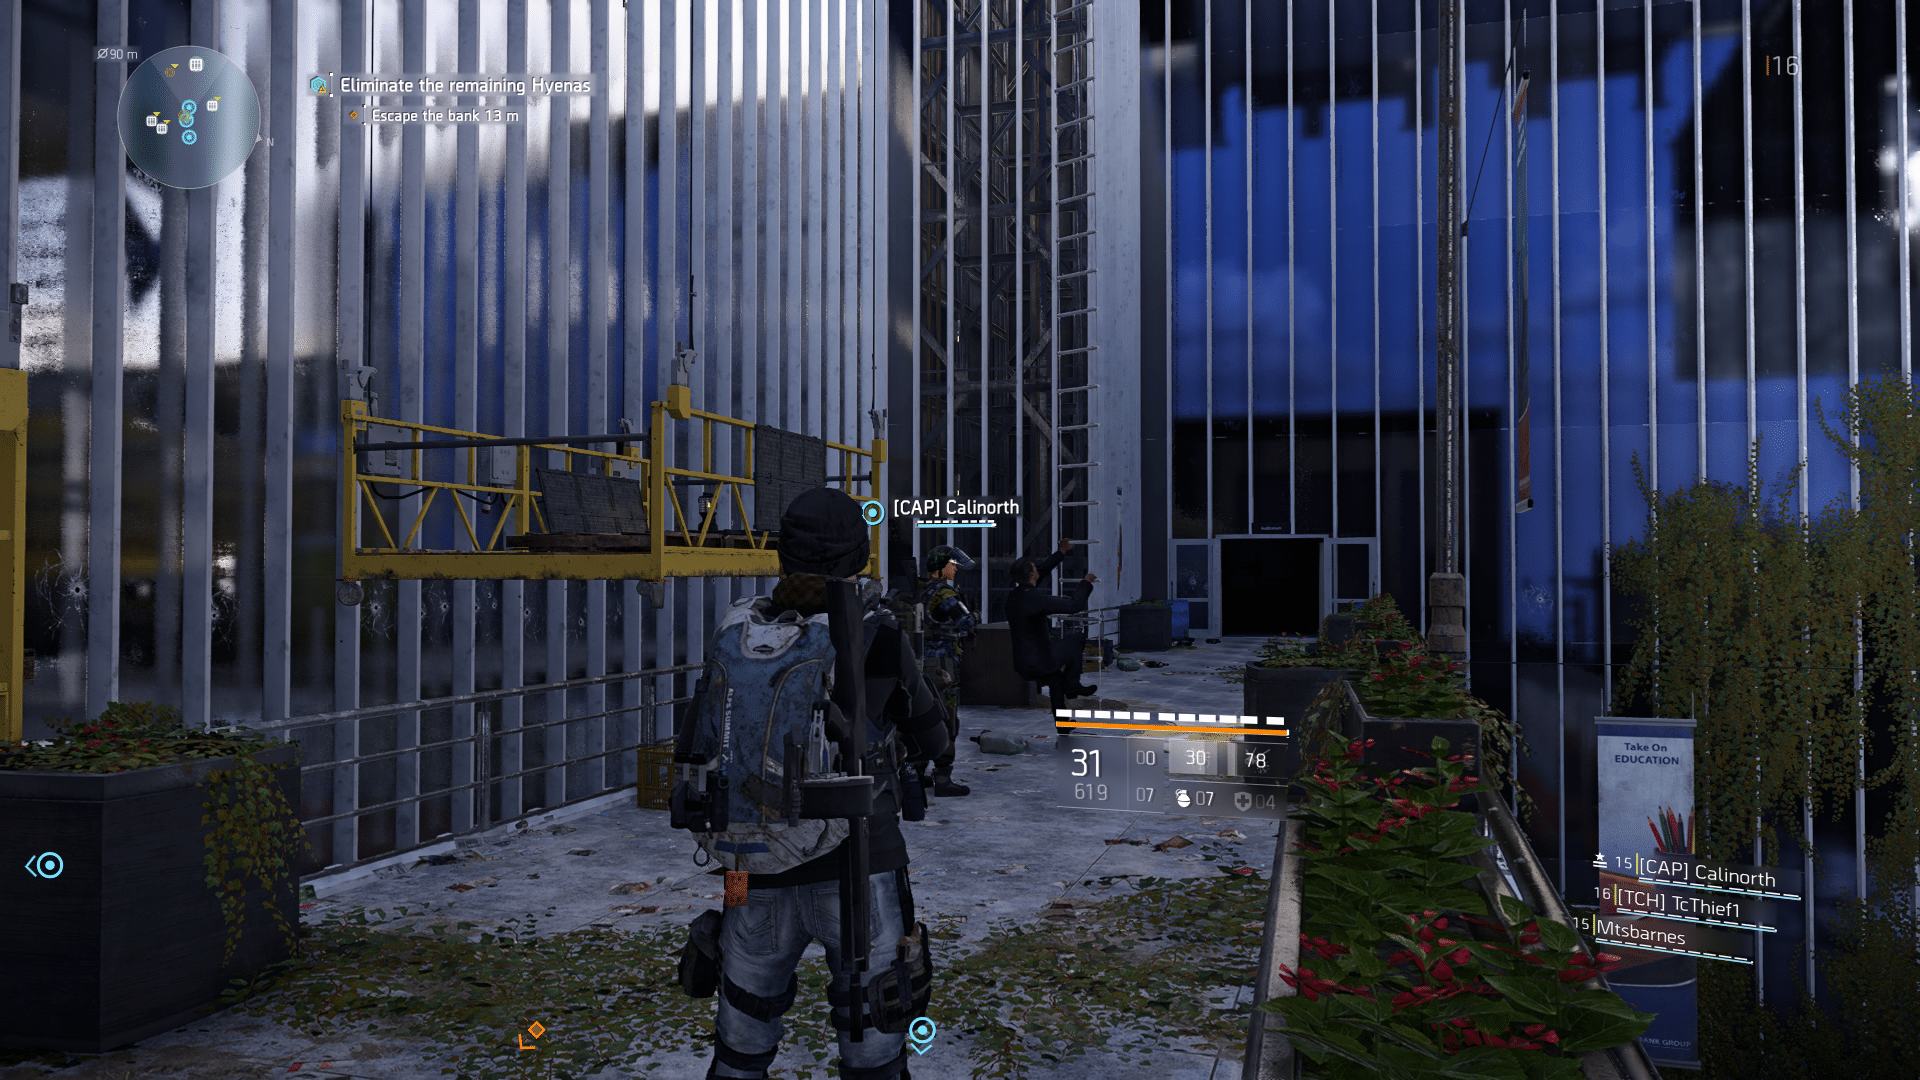 TheDivision2 4 7 2019 10 26 27 PM 273